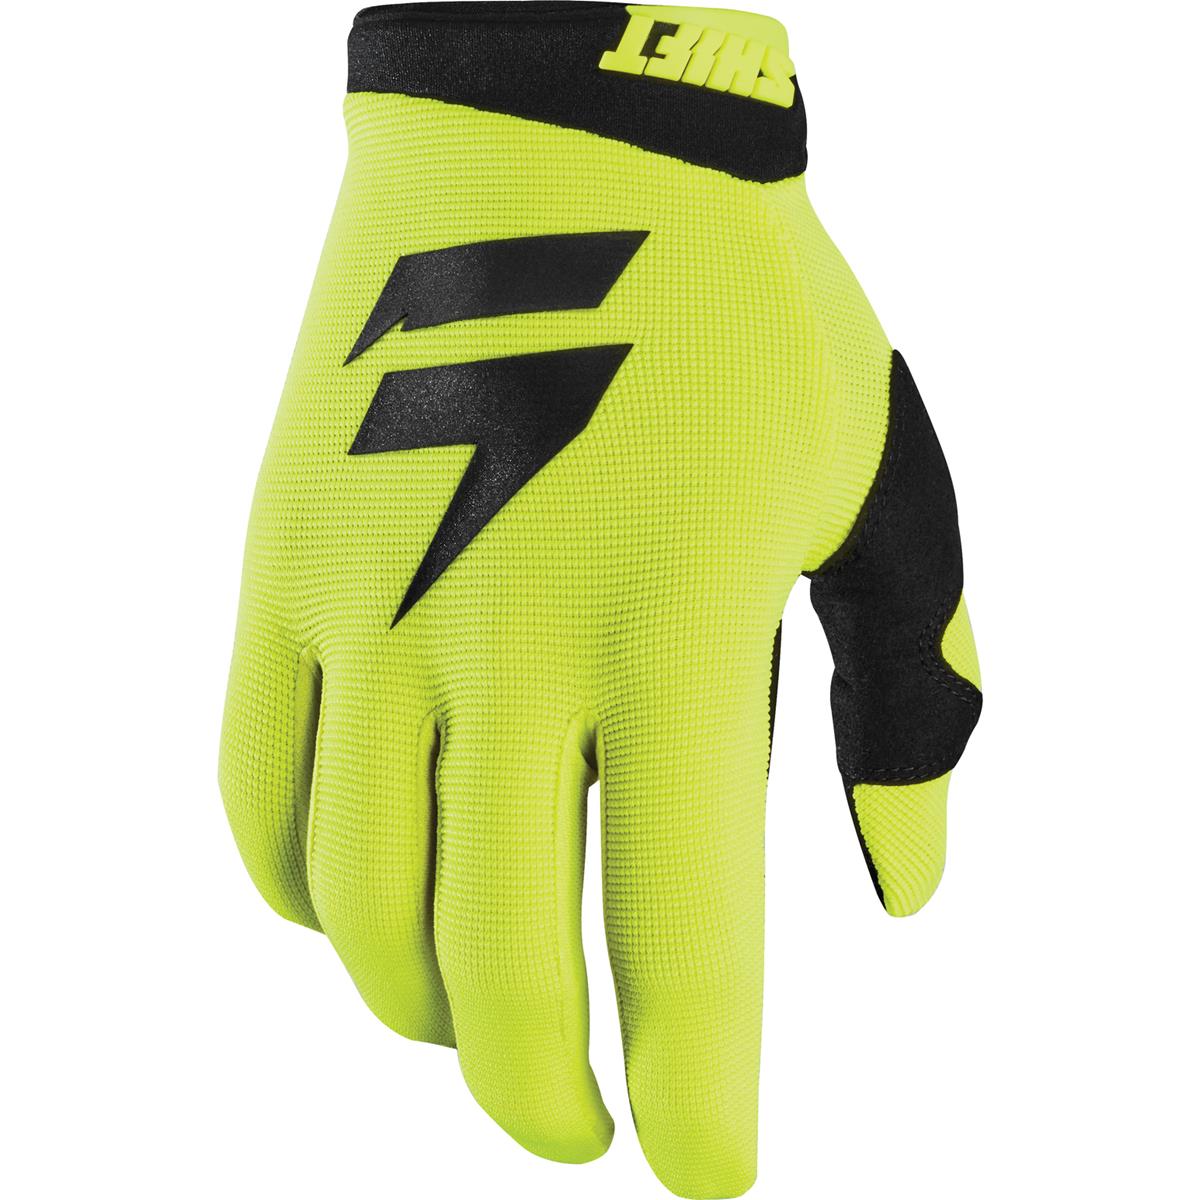 Shift Gloves Whit3 Label Air Fluo Yellow